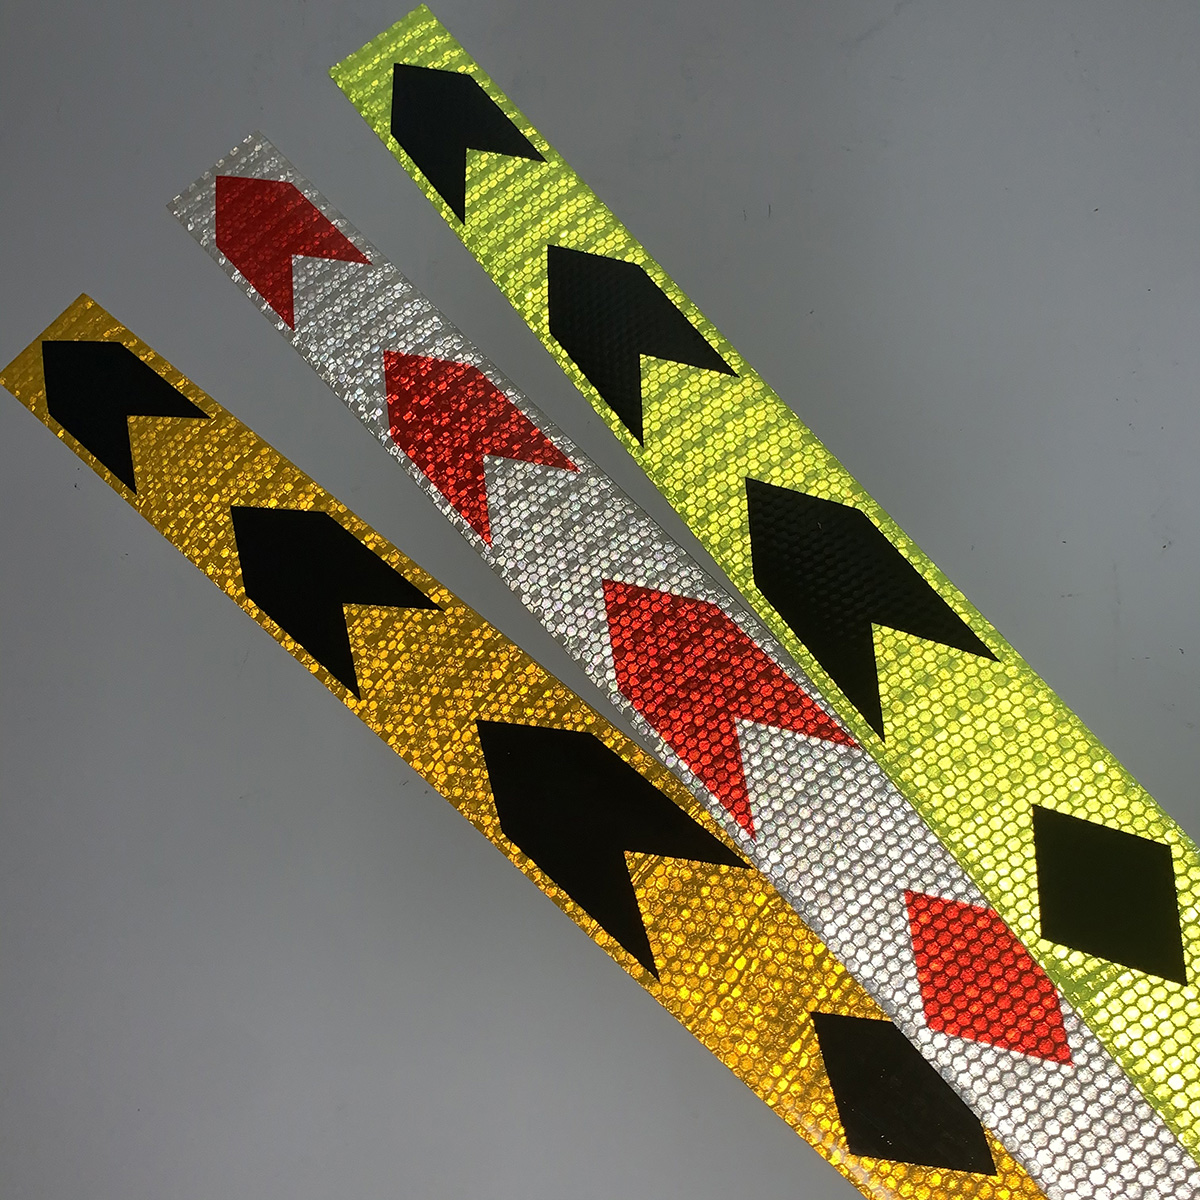 5*90cm PVC Honeycomb Arrow Safety Warning Reflective Stickers for Trucks